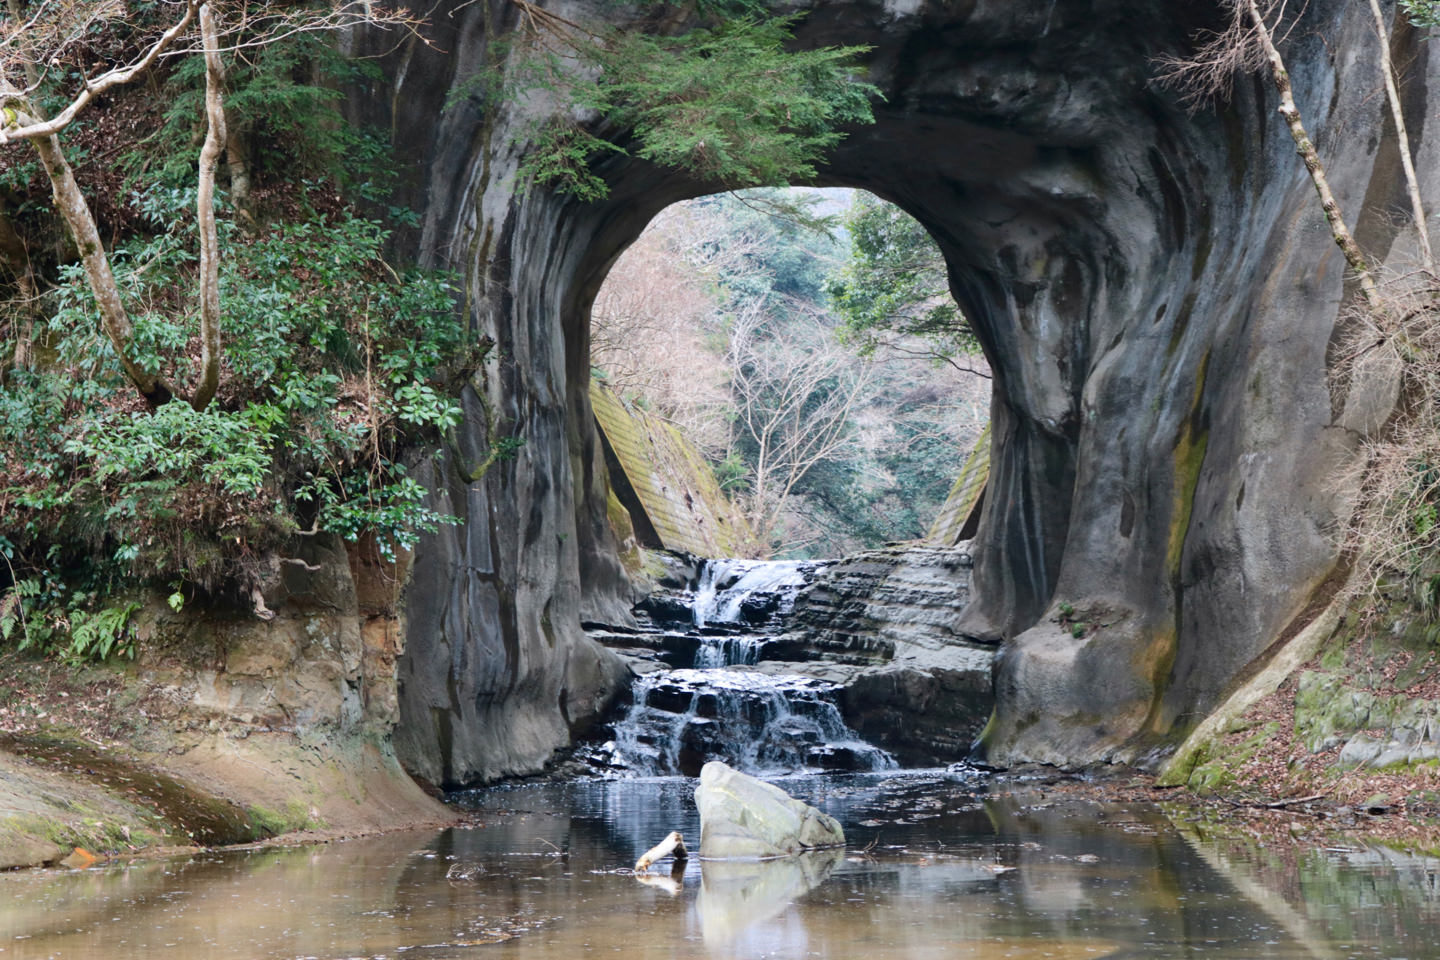 Kameiwa Cave, mistakenly became famous as Nomizo Falls